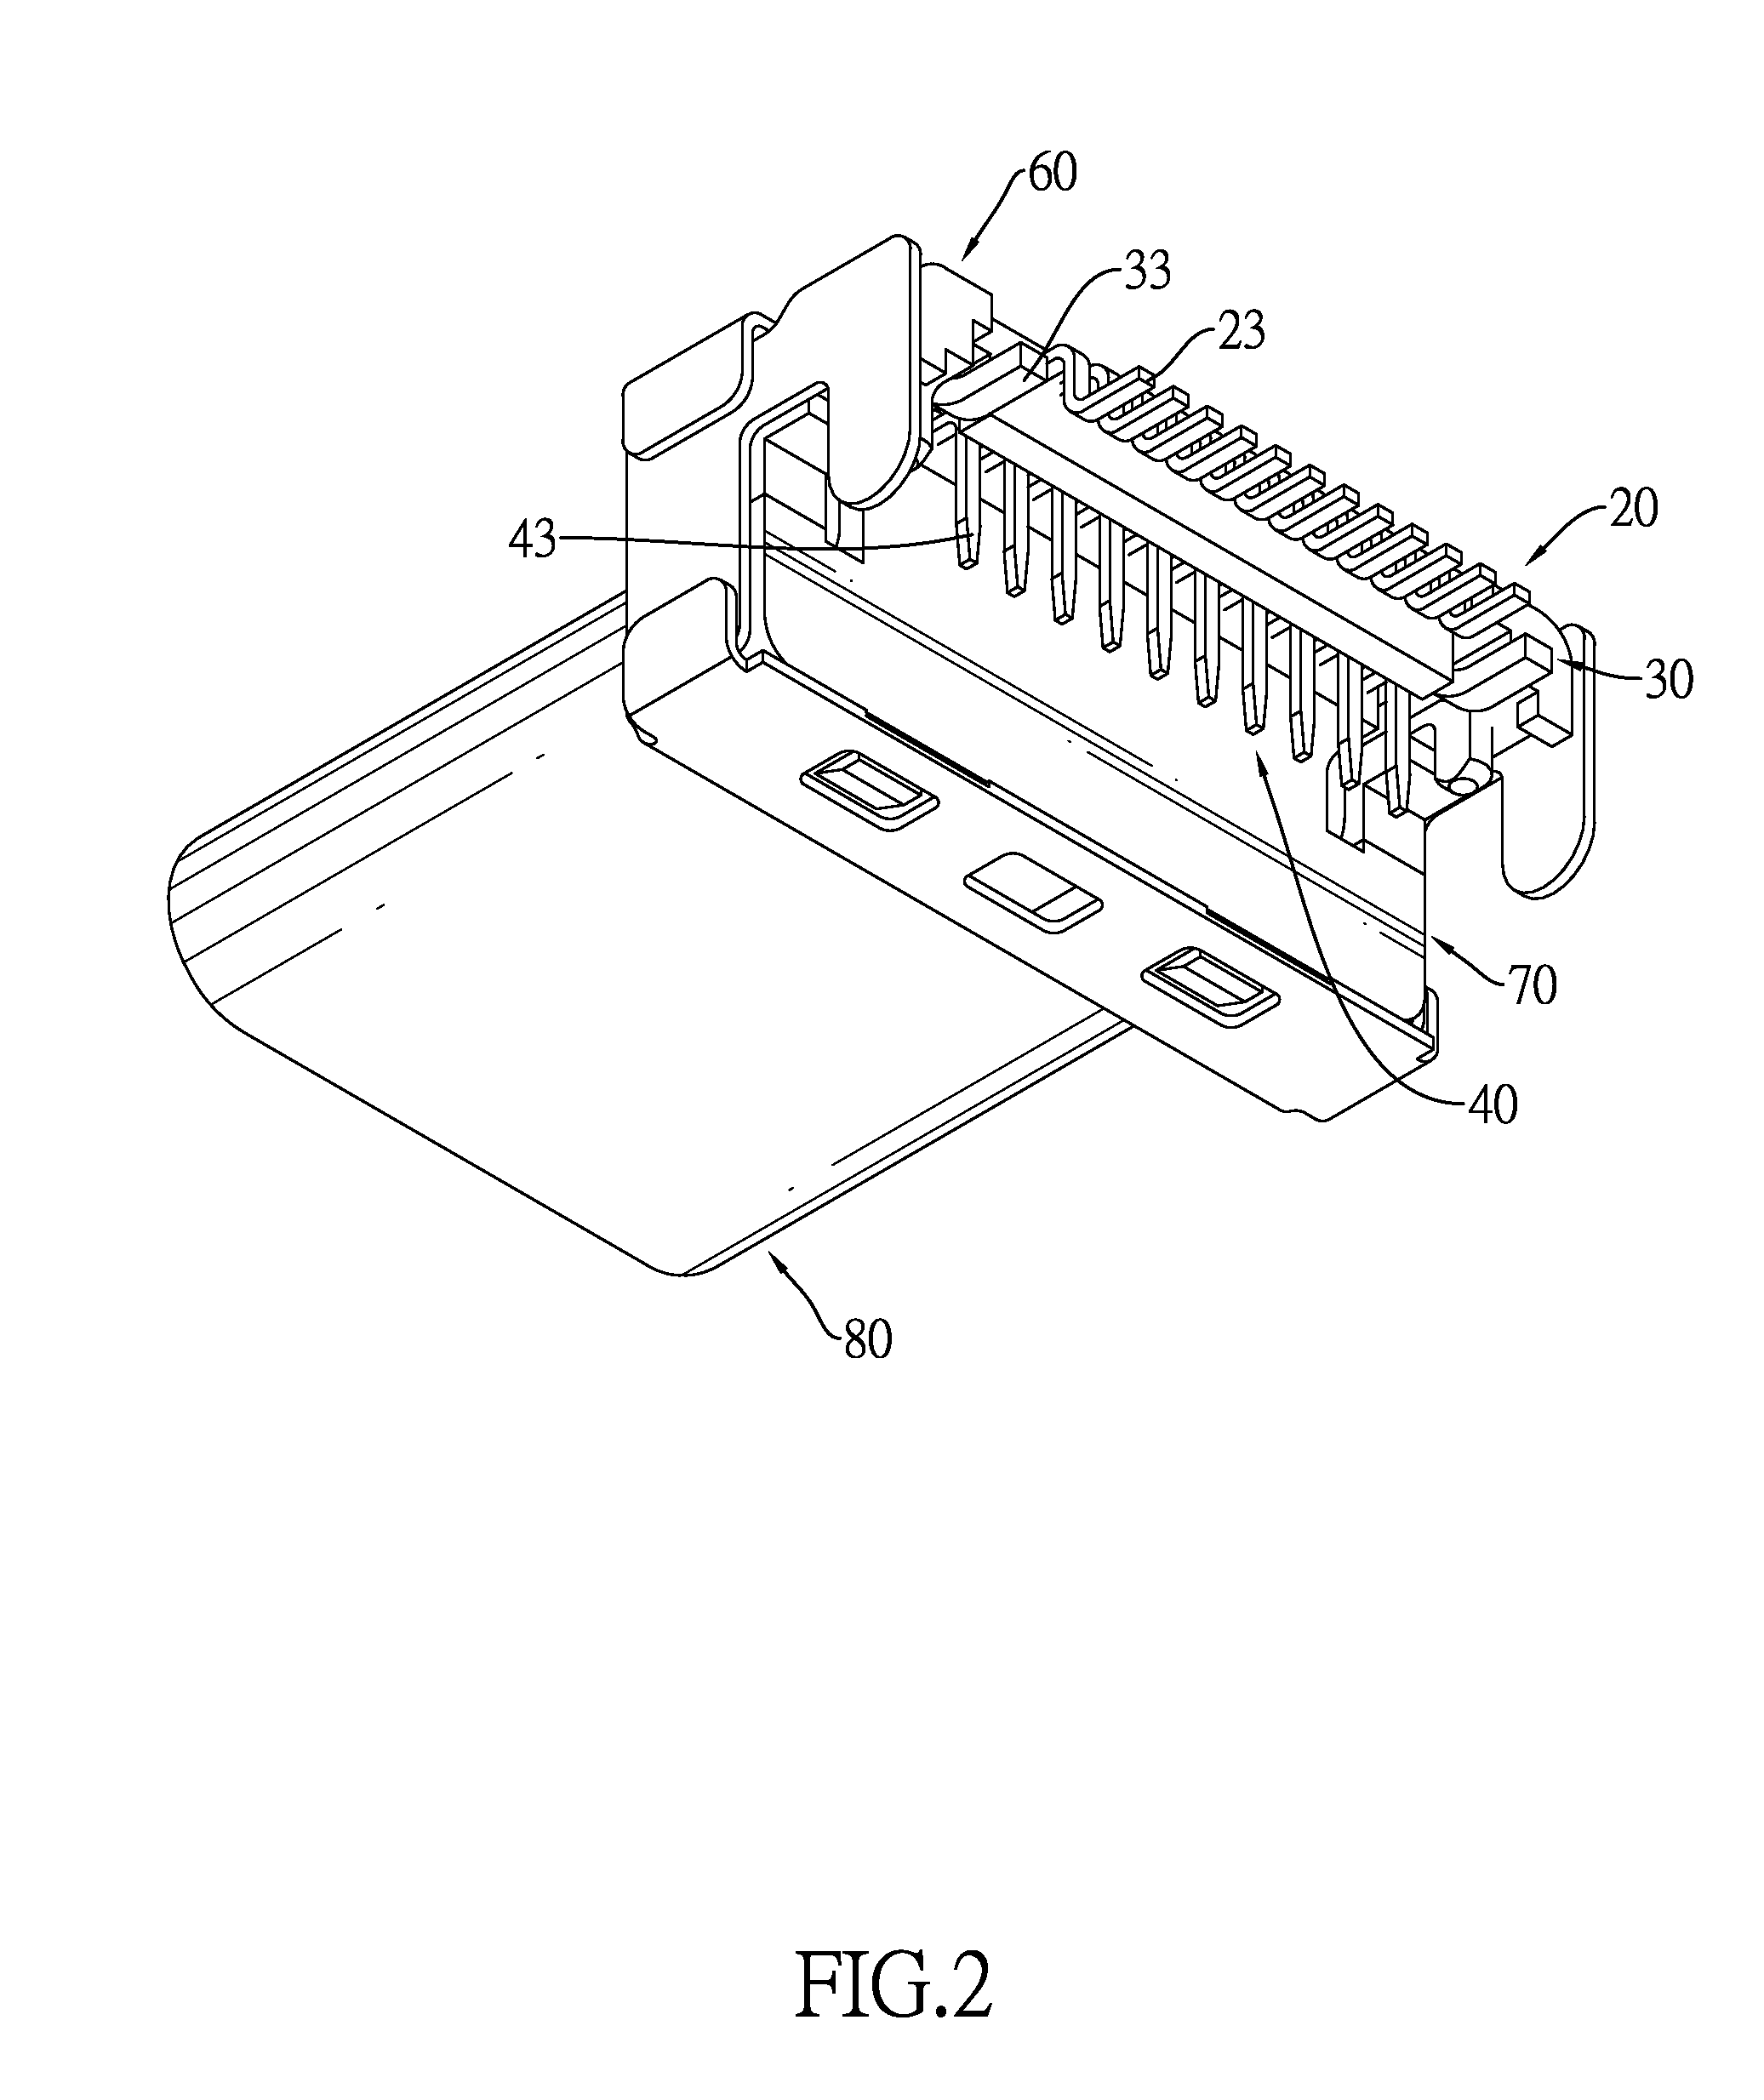 Electrical plug connector assembly